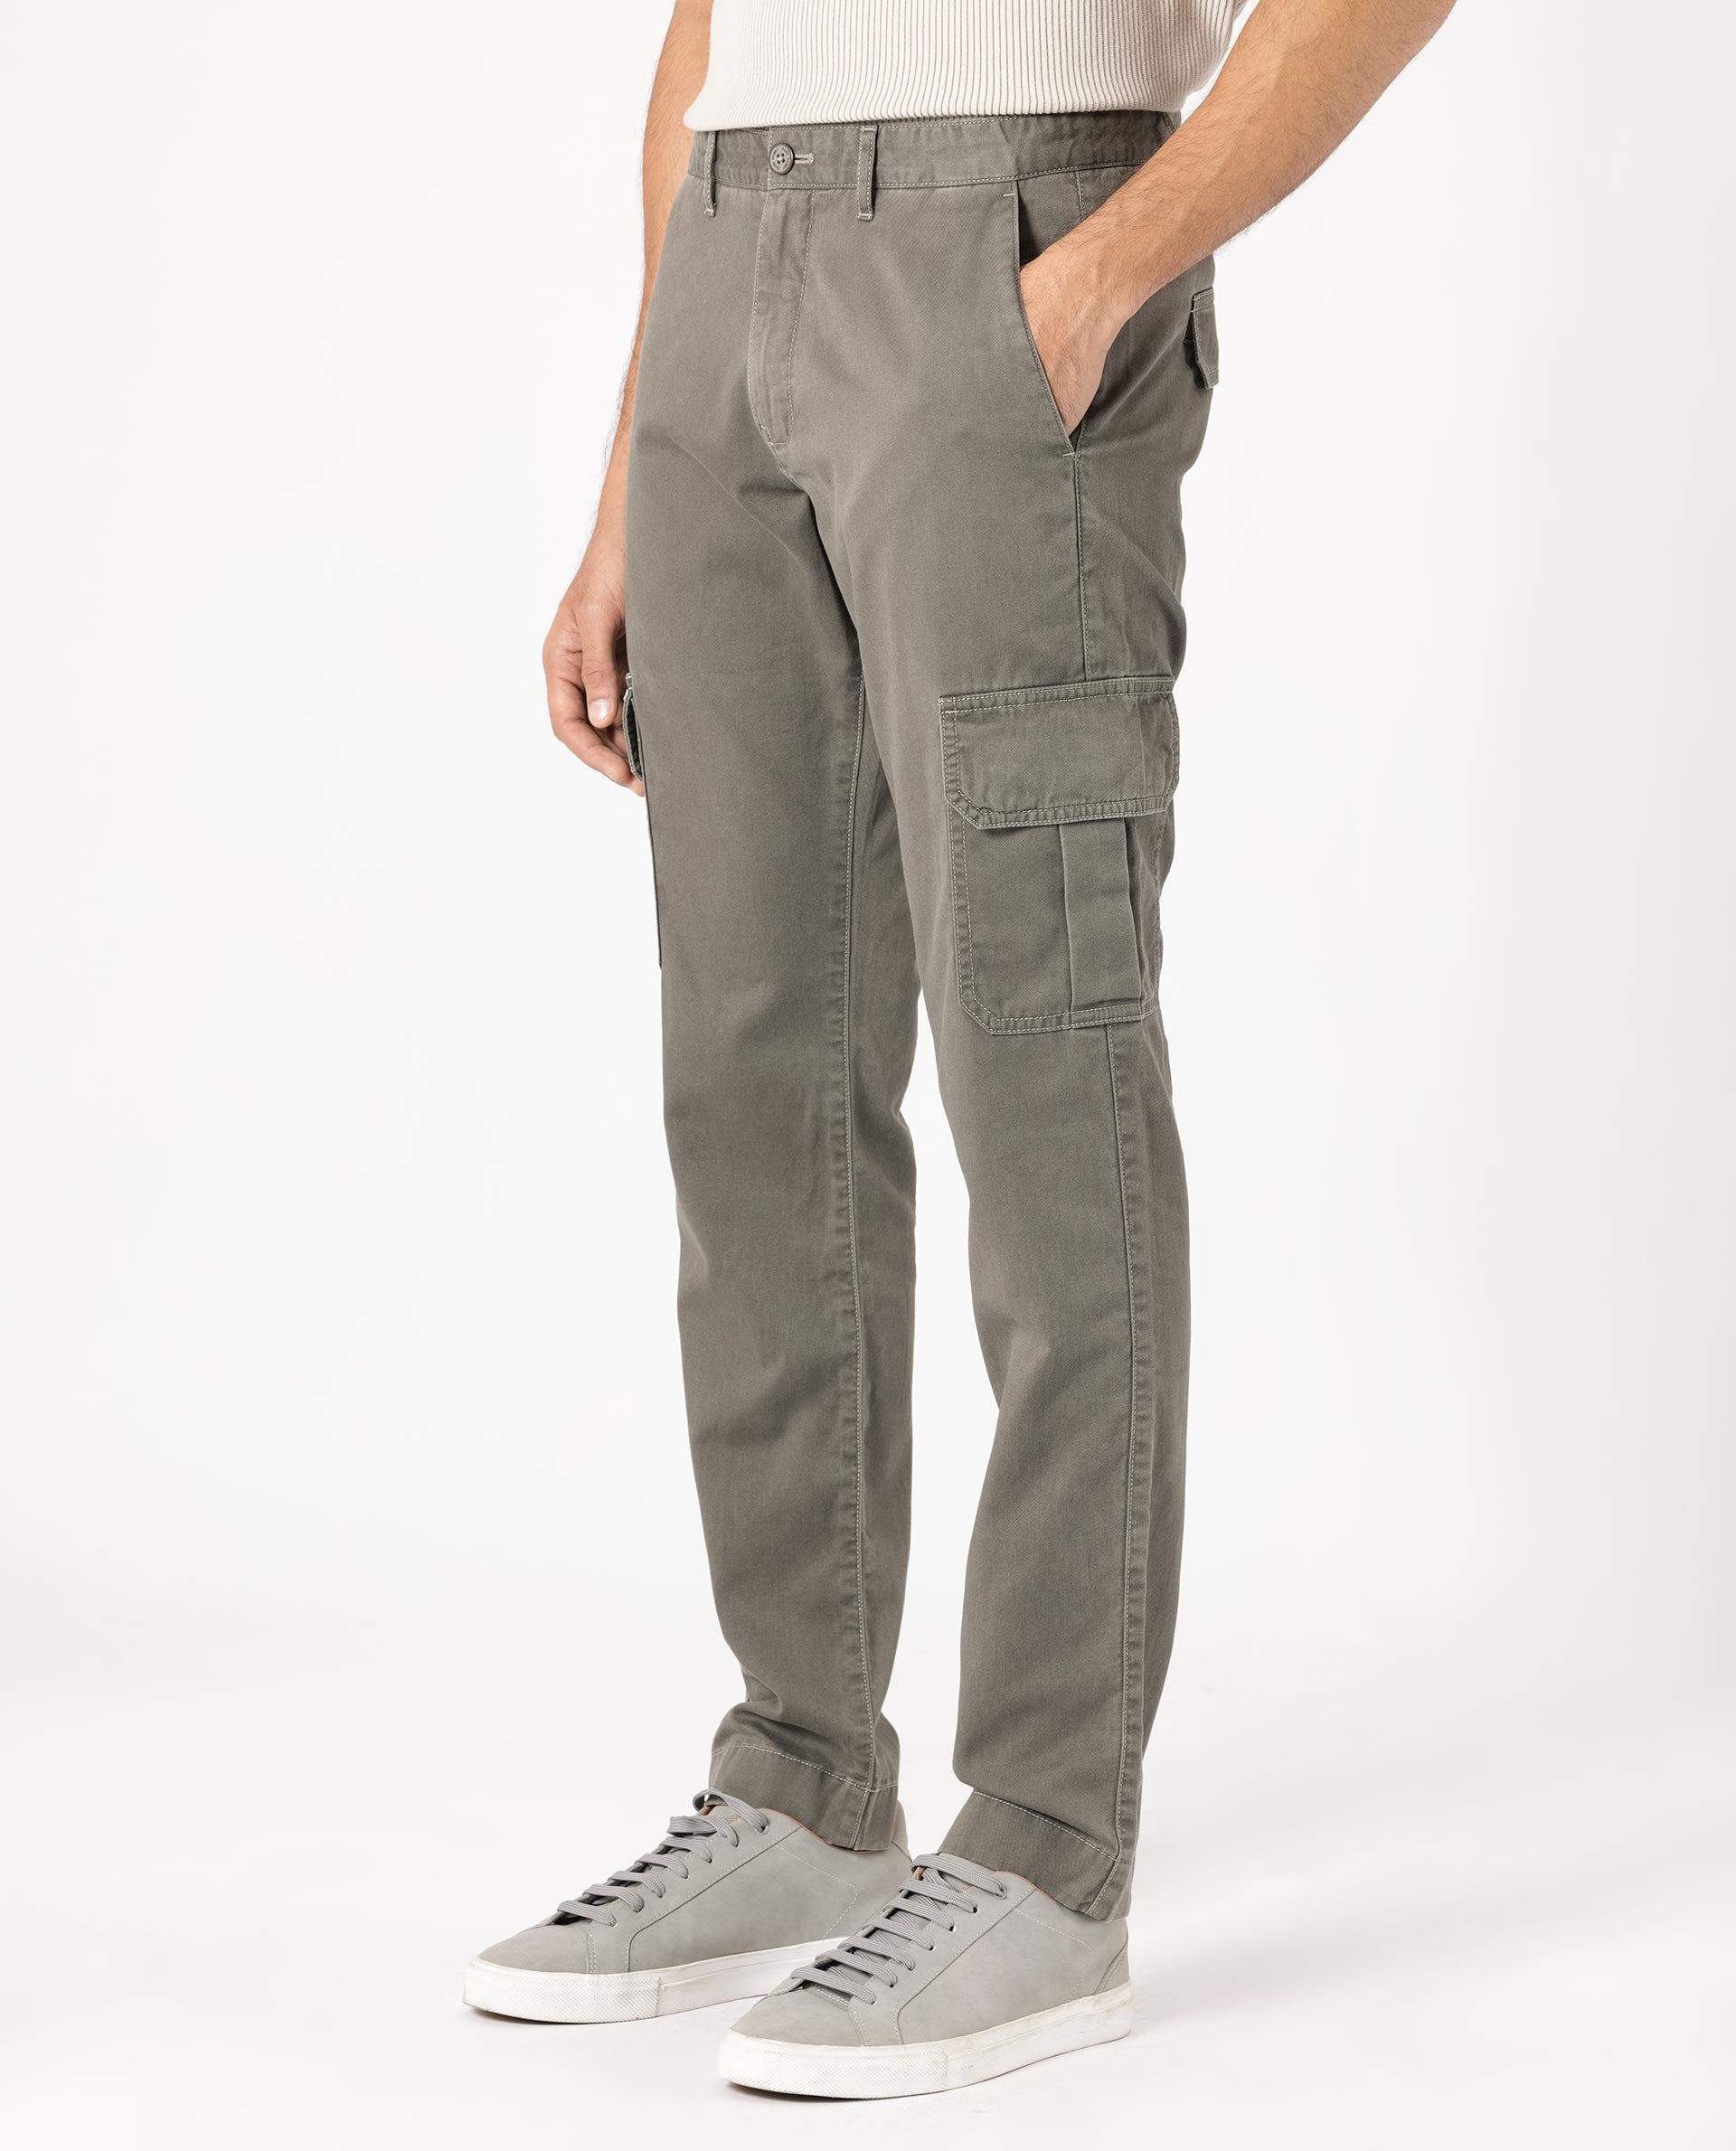 Spring Gray Cargo Pants Male All Season Fit Pant Casual Solid Color Pocket  Trouser Fashion Overalls Beach Pockets Straight - Walmart.com